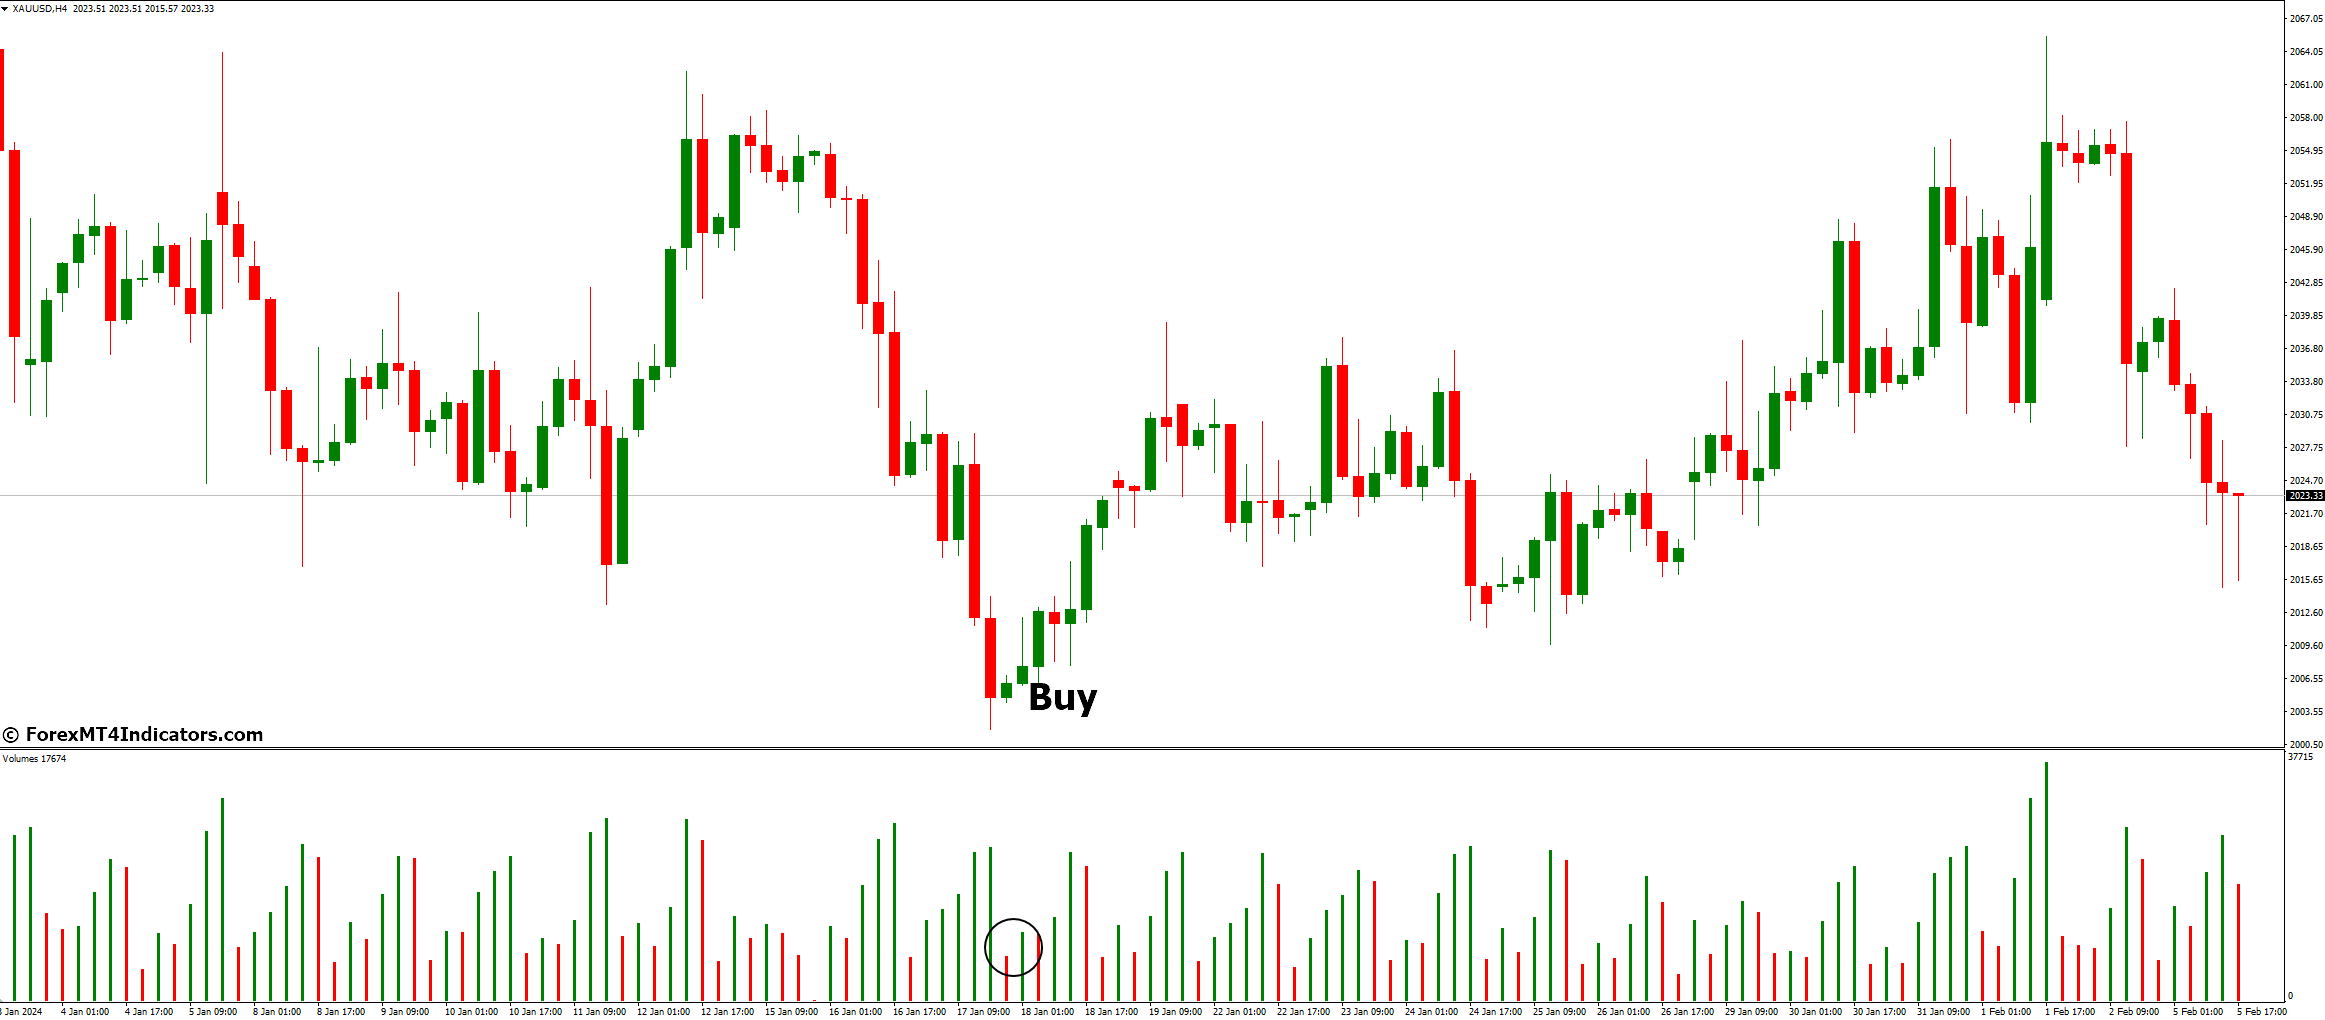 How To Trade With Volumes Indicator - Buy Entry